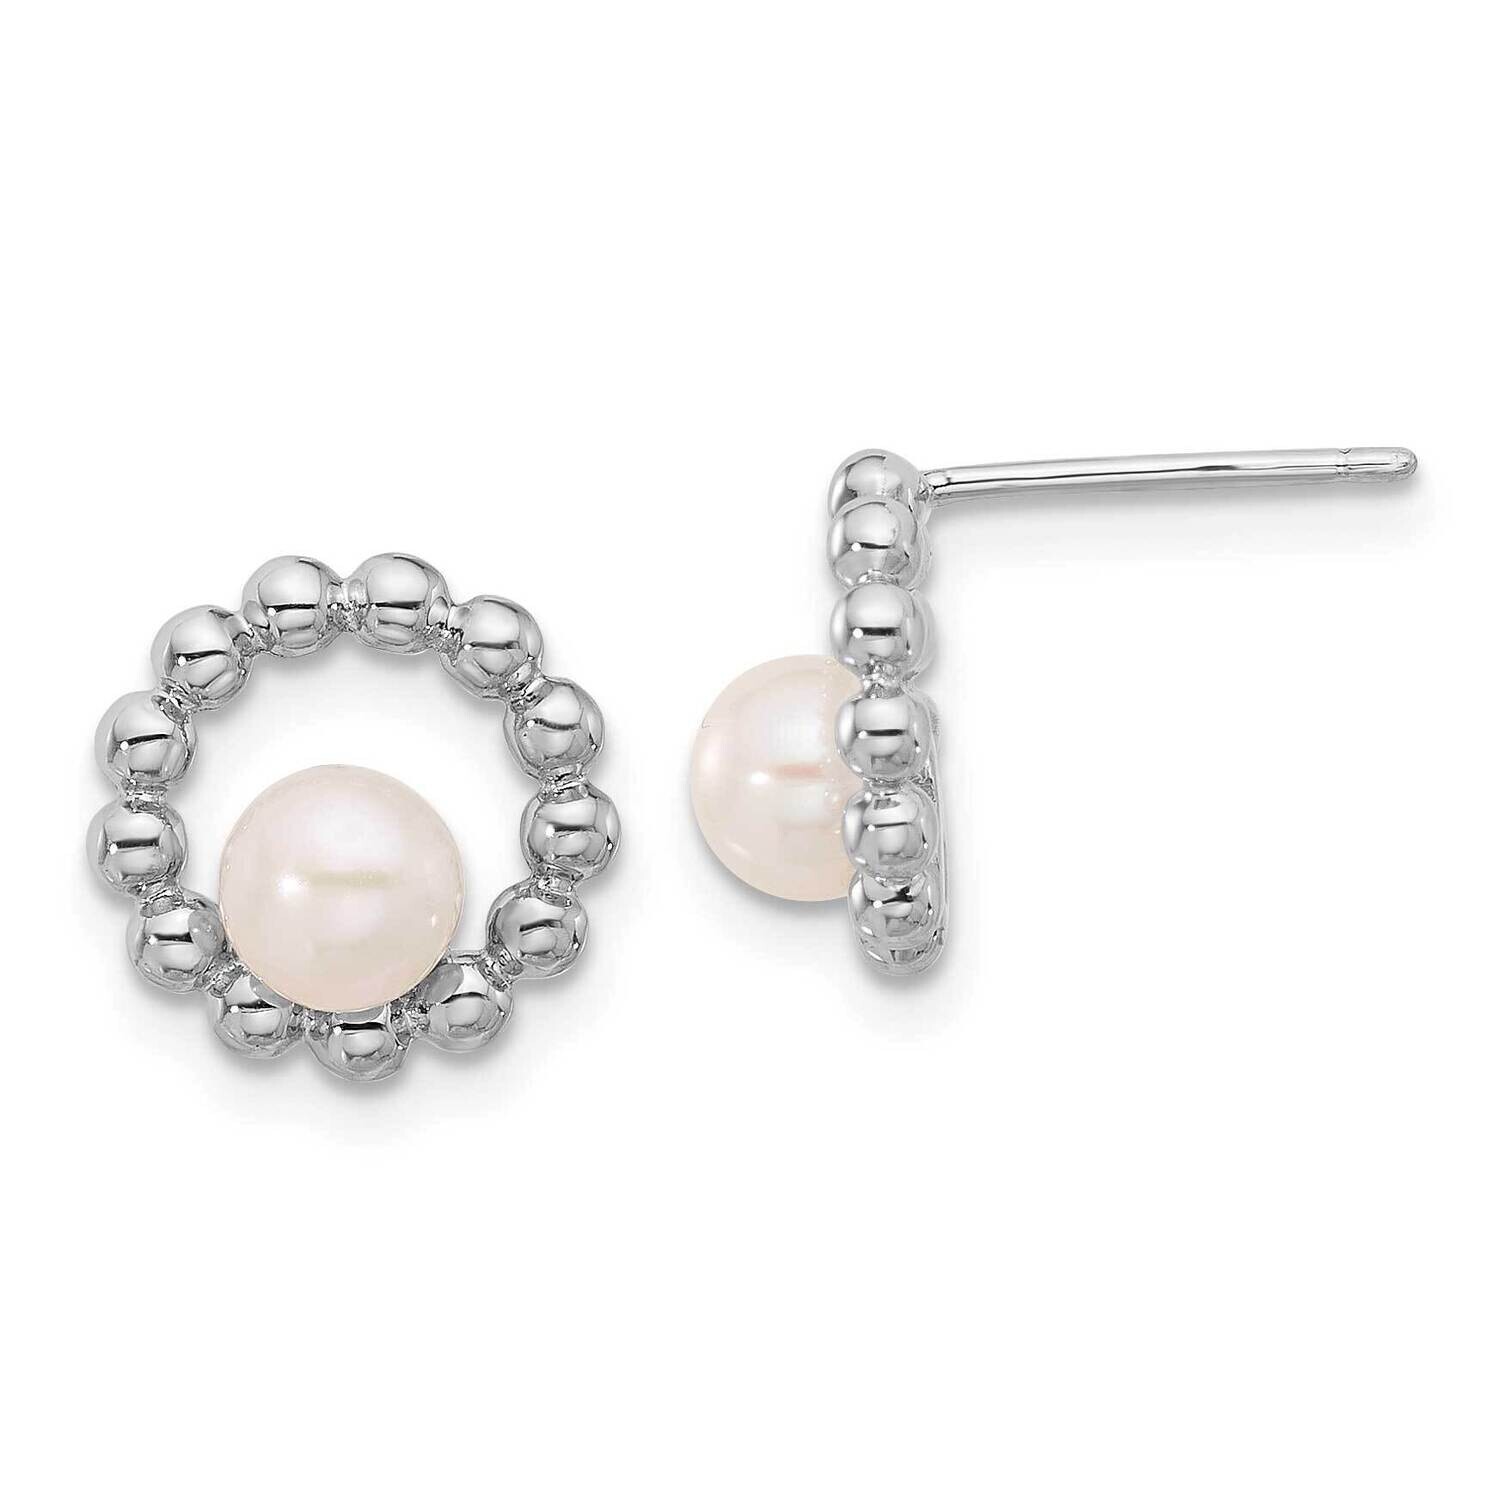 5-6mm Button White Fwc Pearl Earrings Sterling Silver Rhodium-Plated QE17212